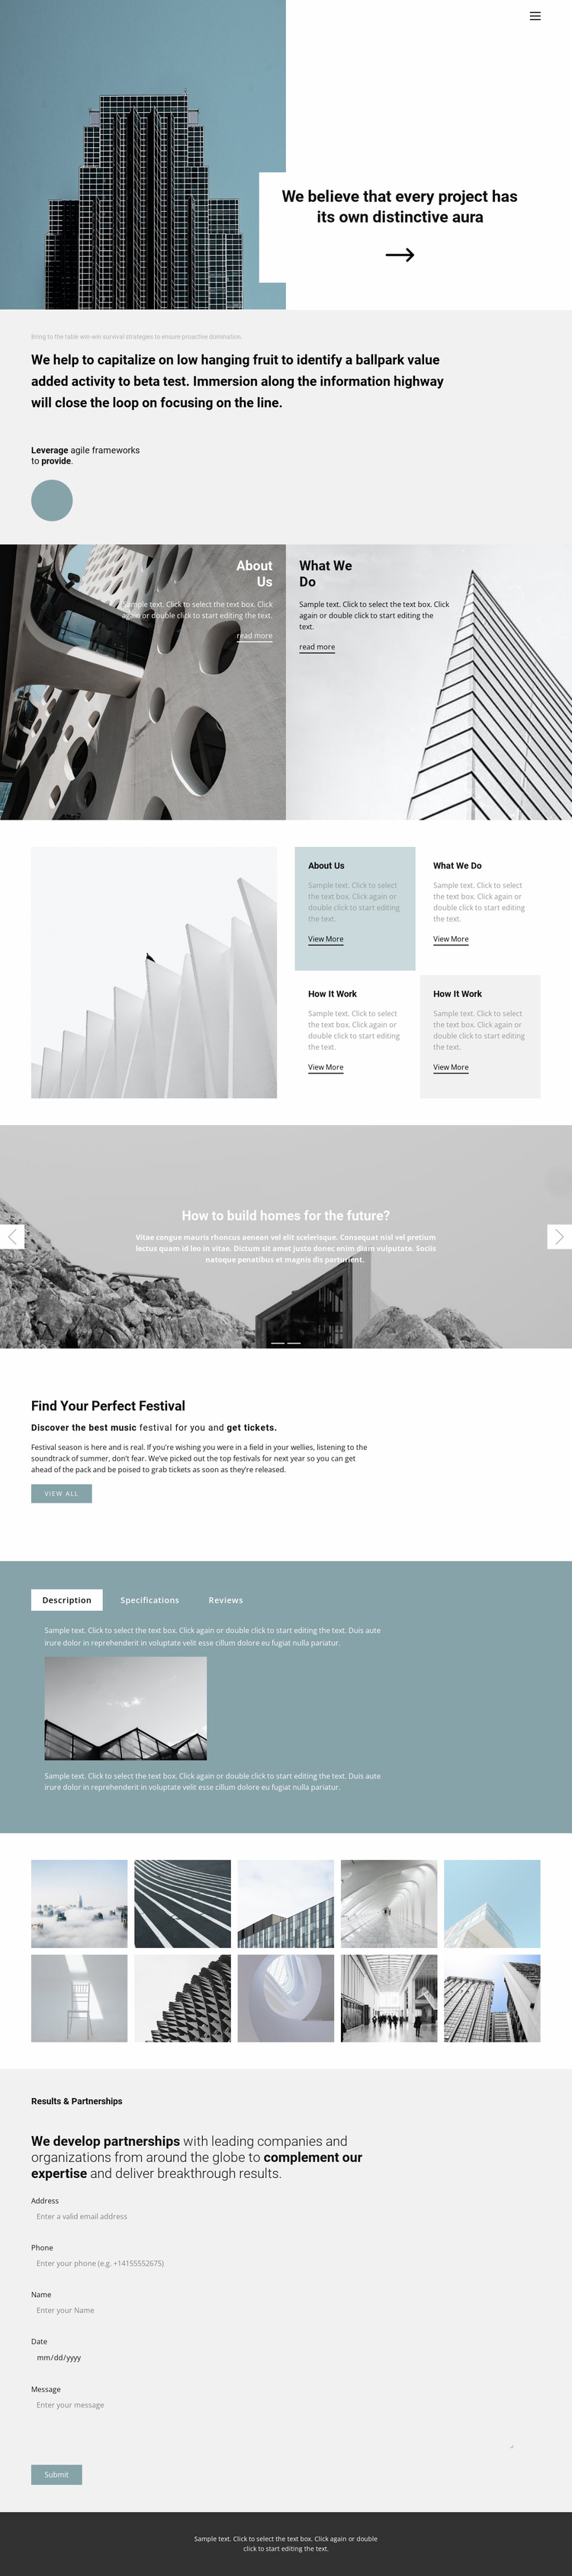 Choose an office for yourself Website Template